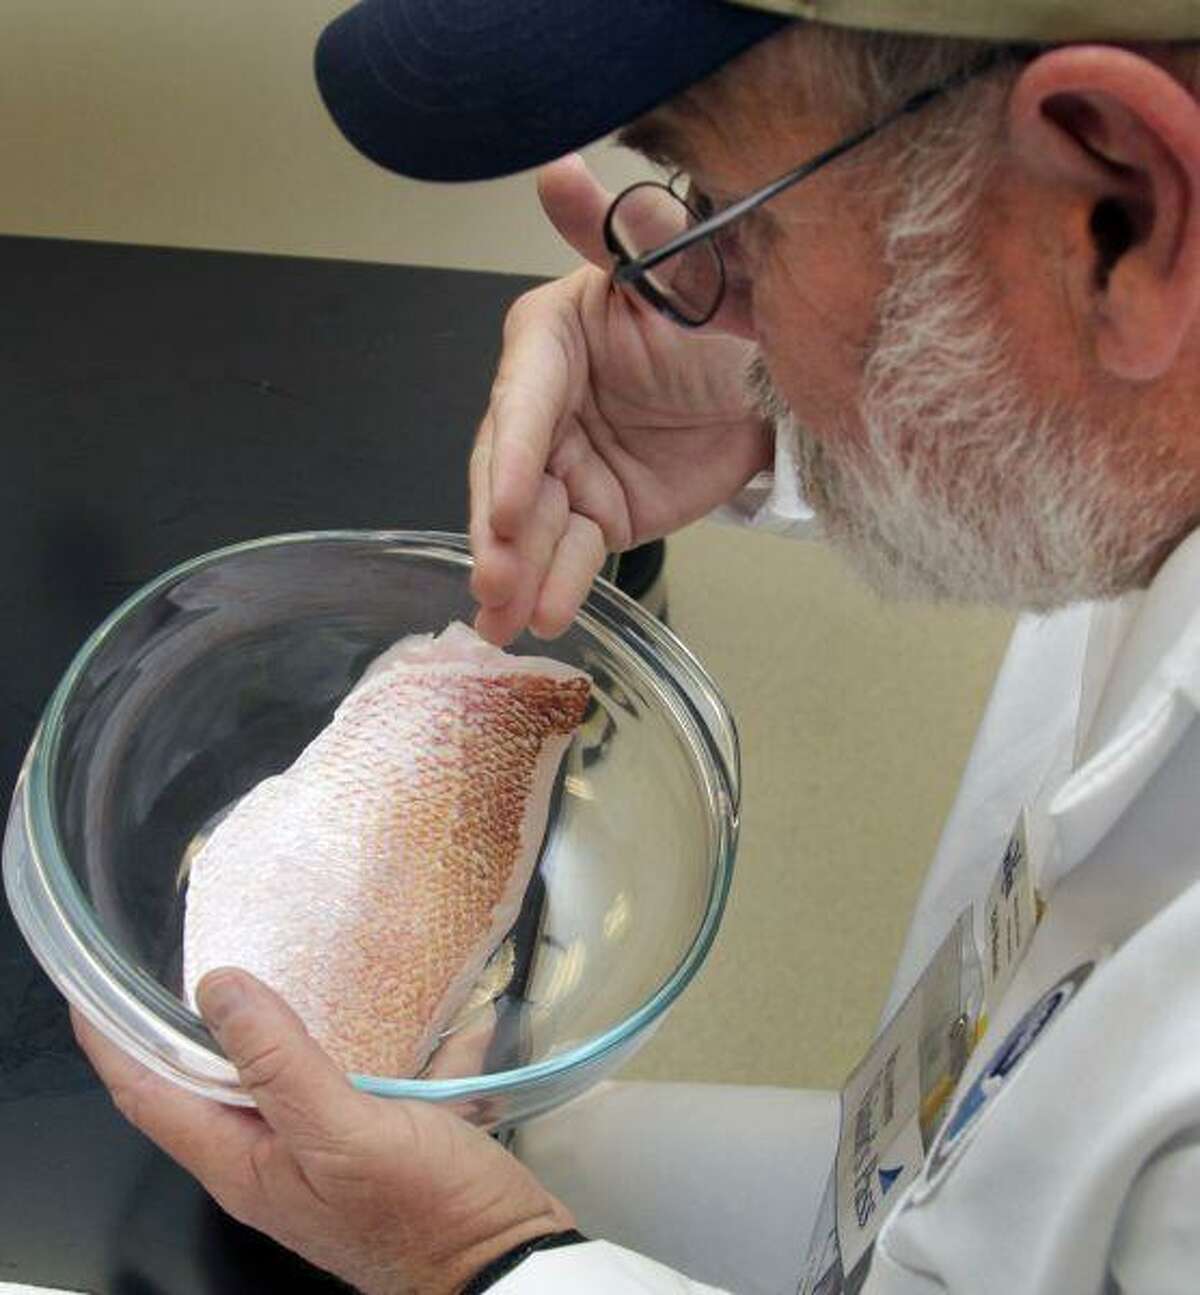 In this June 3 file photo, William Mahan of the University of Florida demonstrates how to smell for taint in seafood as he moves the air across a red fish filet at NOAA’s seafood inspection program in Pascagoula, Miss.